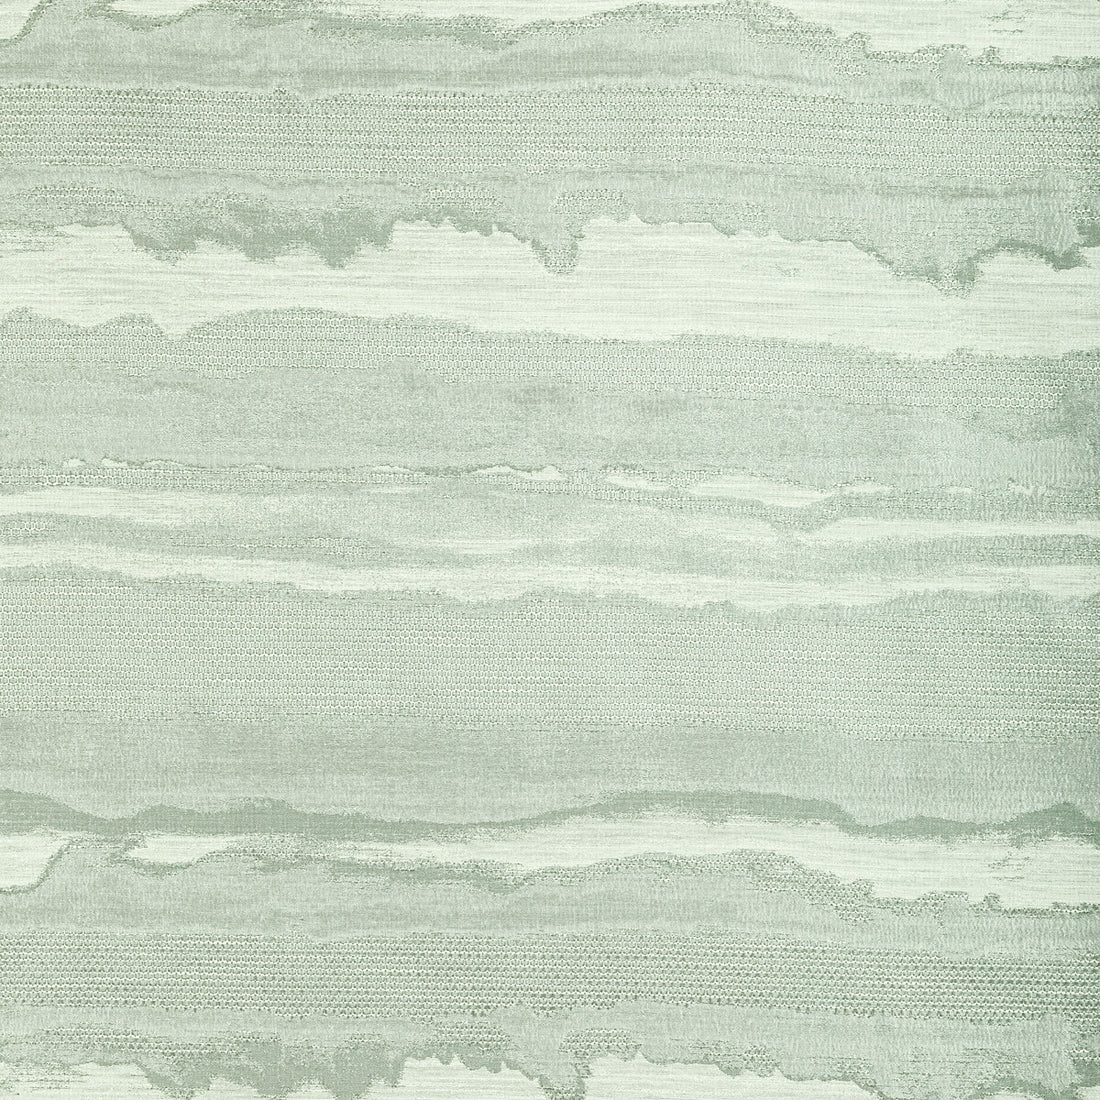 Silken Dreams fabric in mist color - pattern 4952.13.0 - by Kravet Couture in the Modern Luxe Silk Luster collection